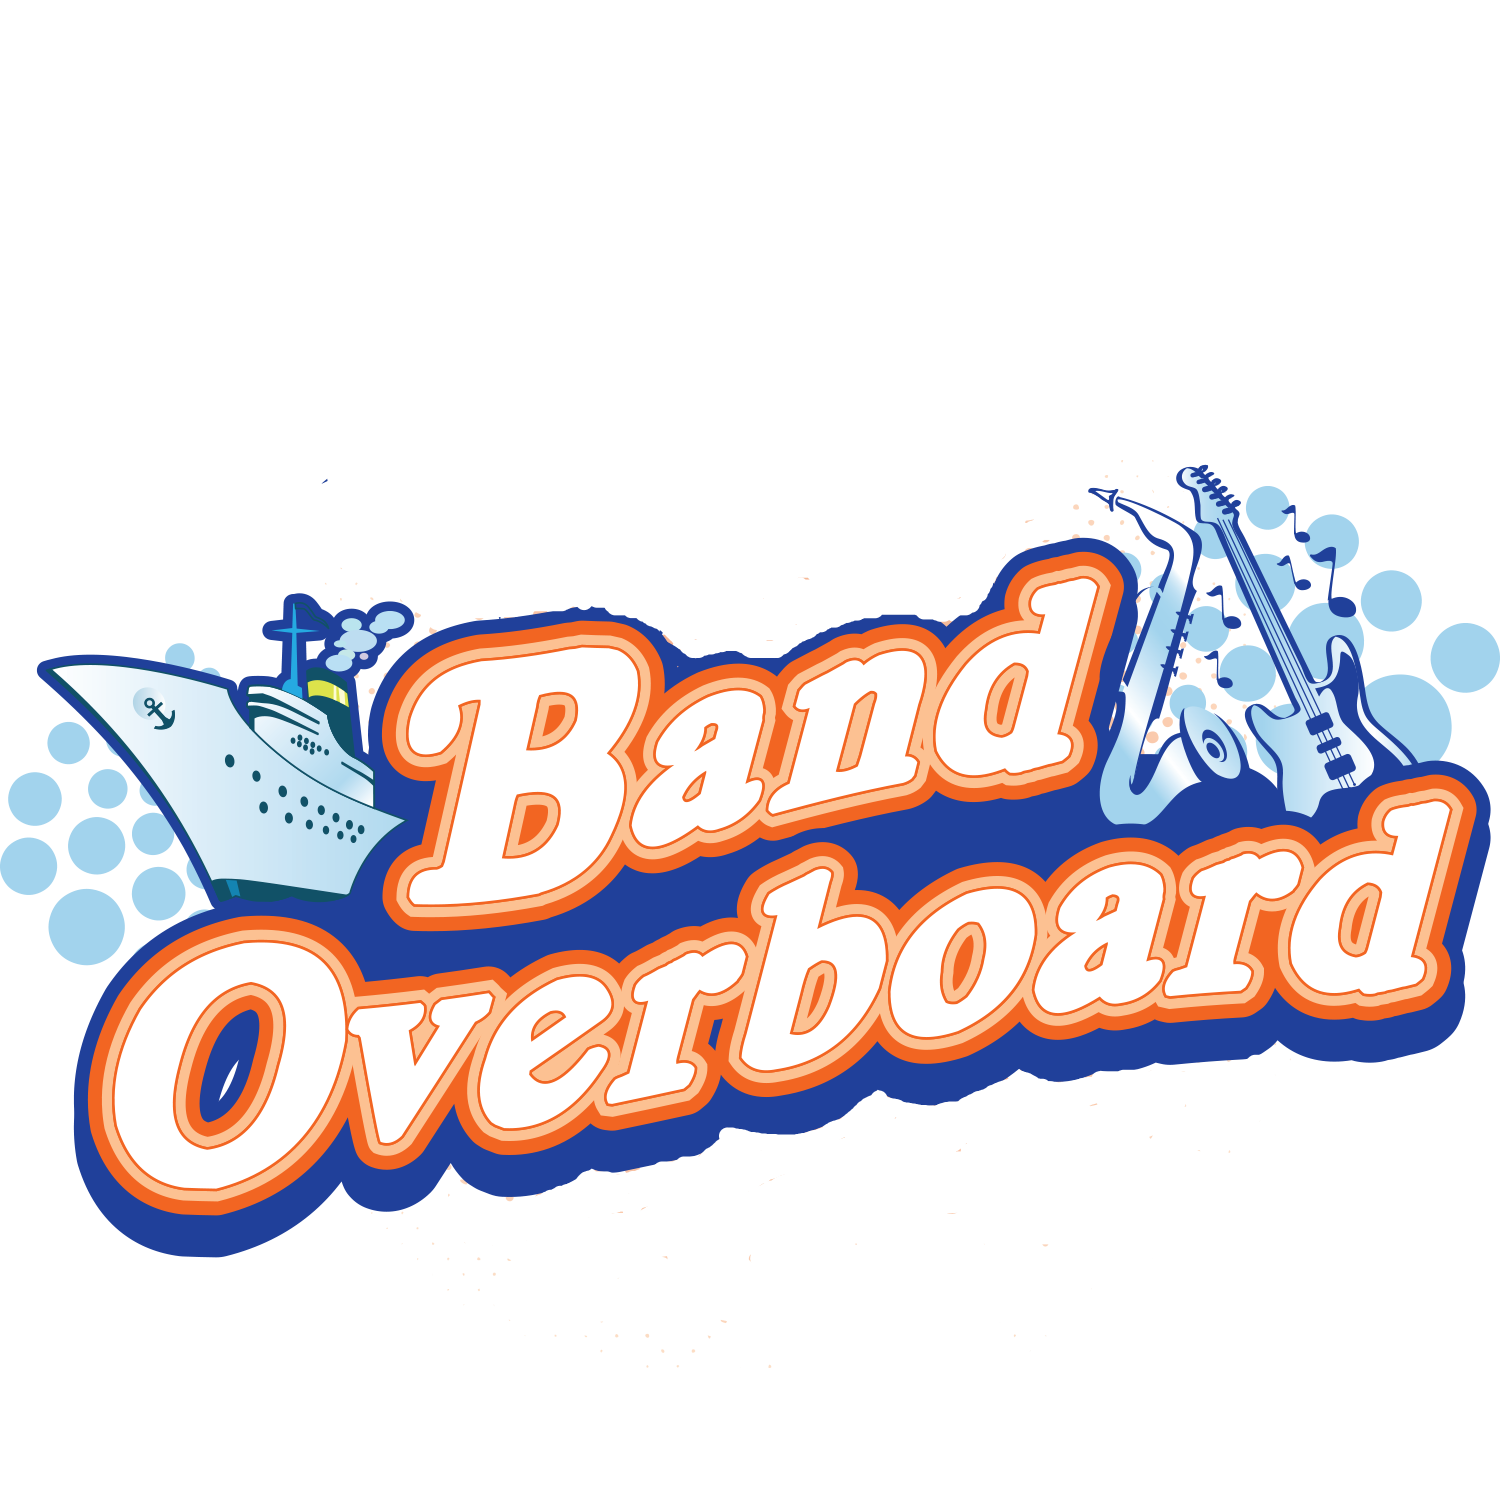 
				
				
				
				Band Overboard
		
		
		
		